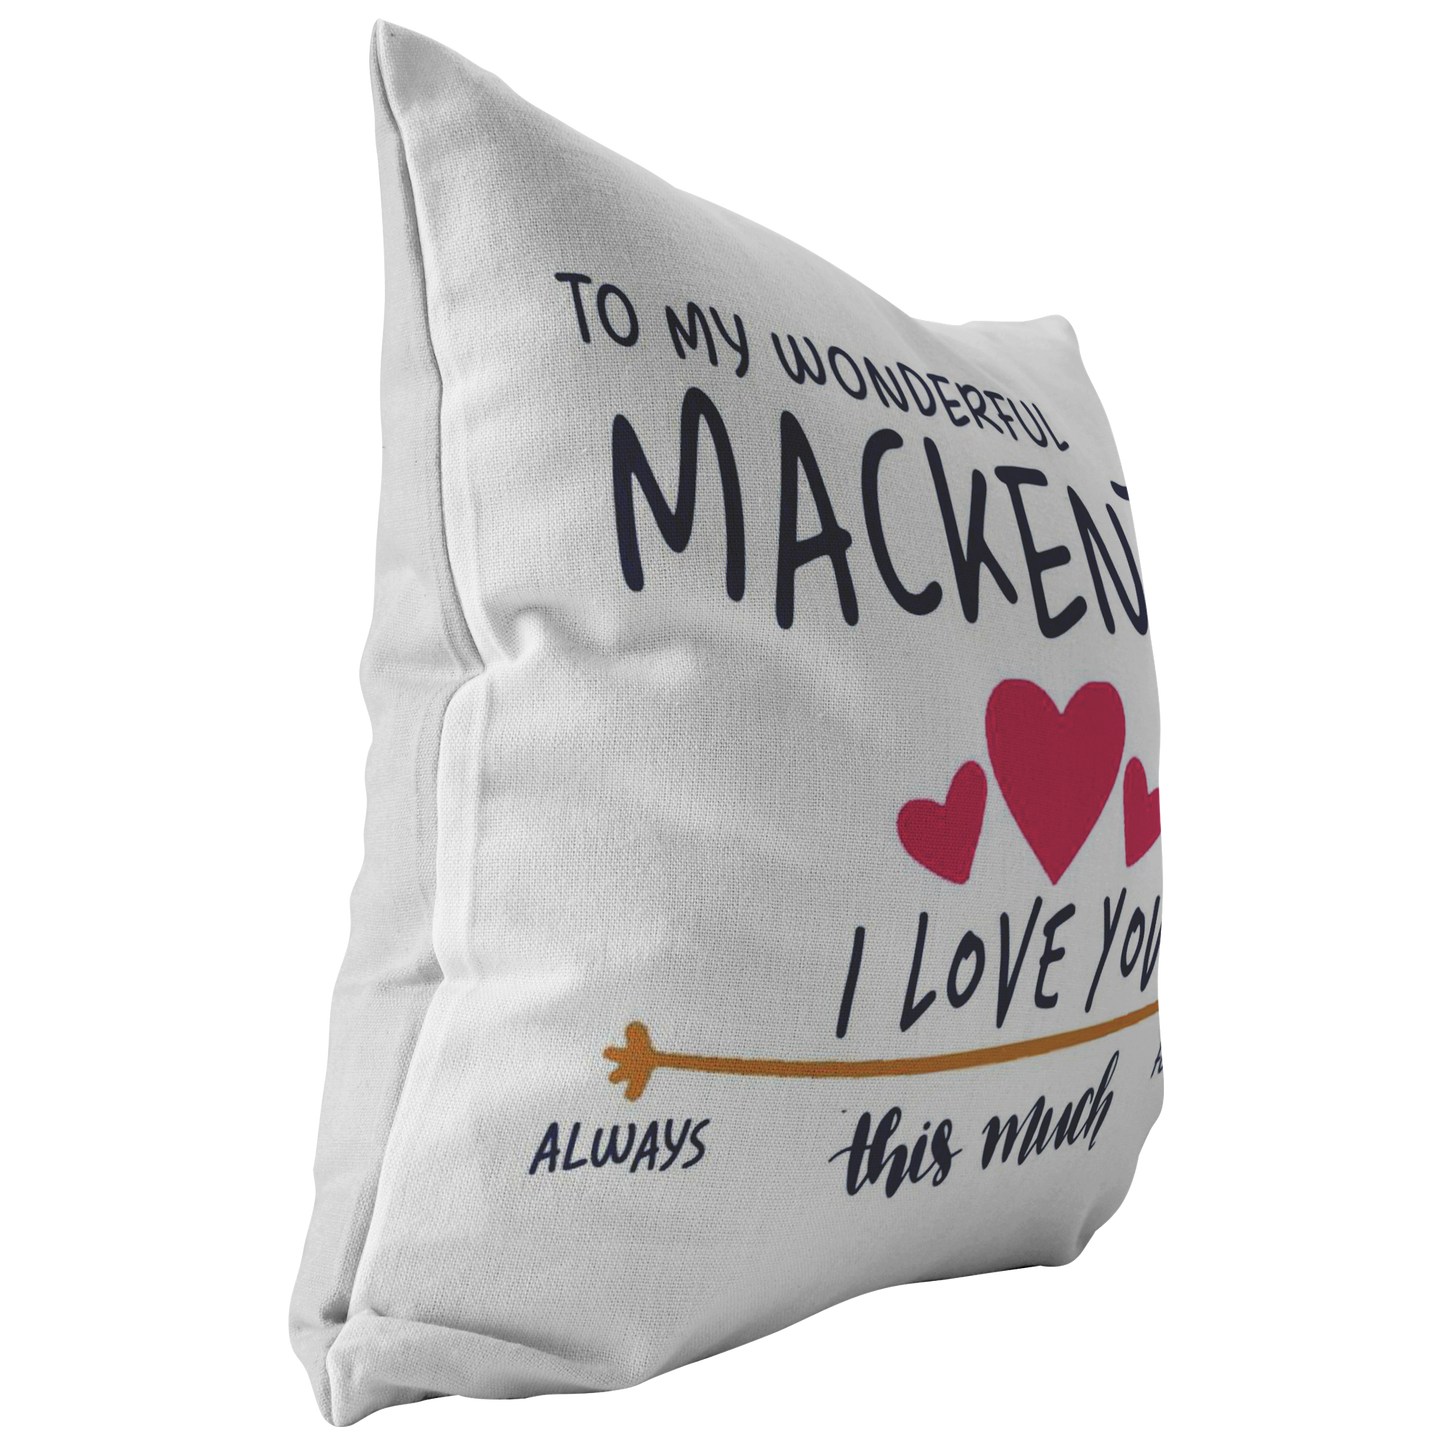 PL-21251588-sp-28897 - [ Mackenzie | 1 | 1 ] (PI_ThrowPillowCovers) Valentines Day Pillow Covers 18x18 - to My Wonderful Mackenz